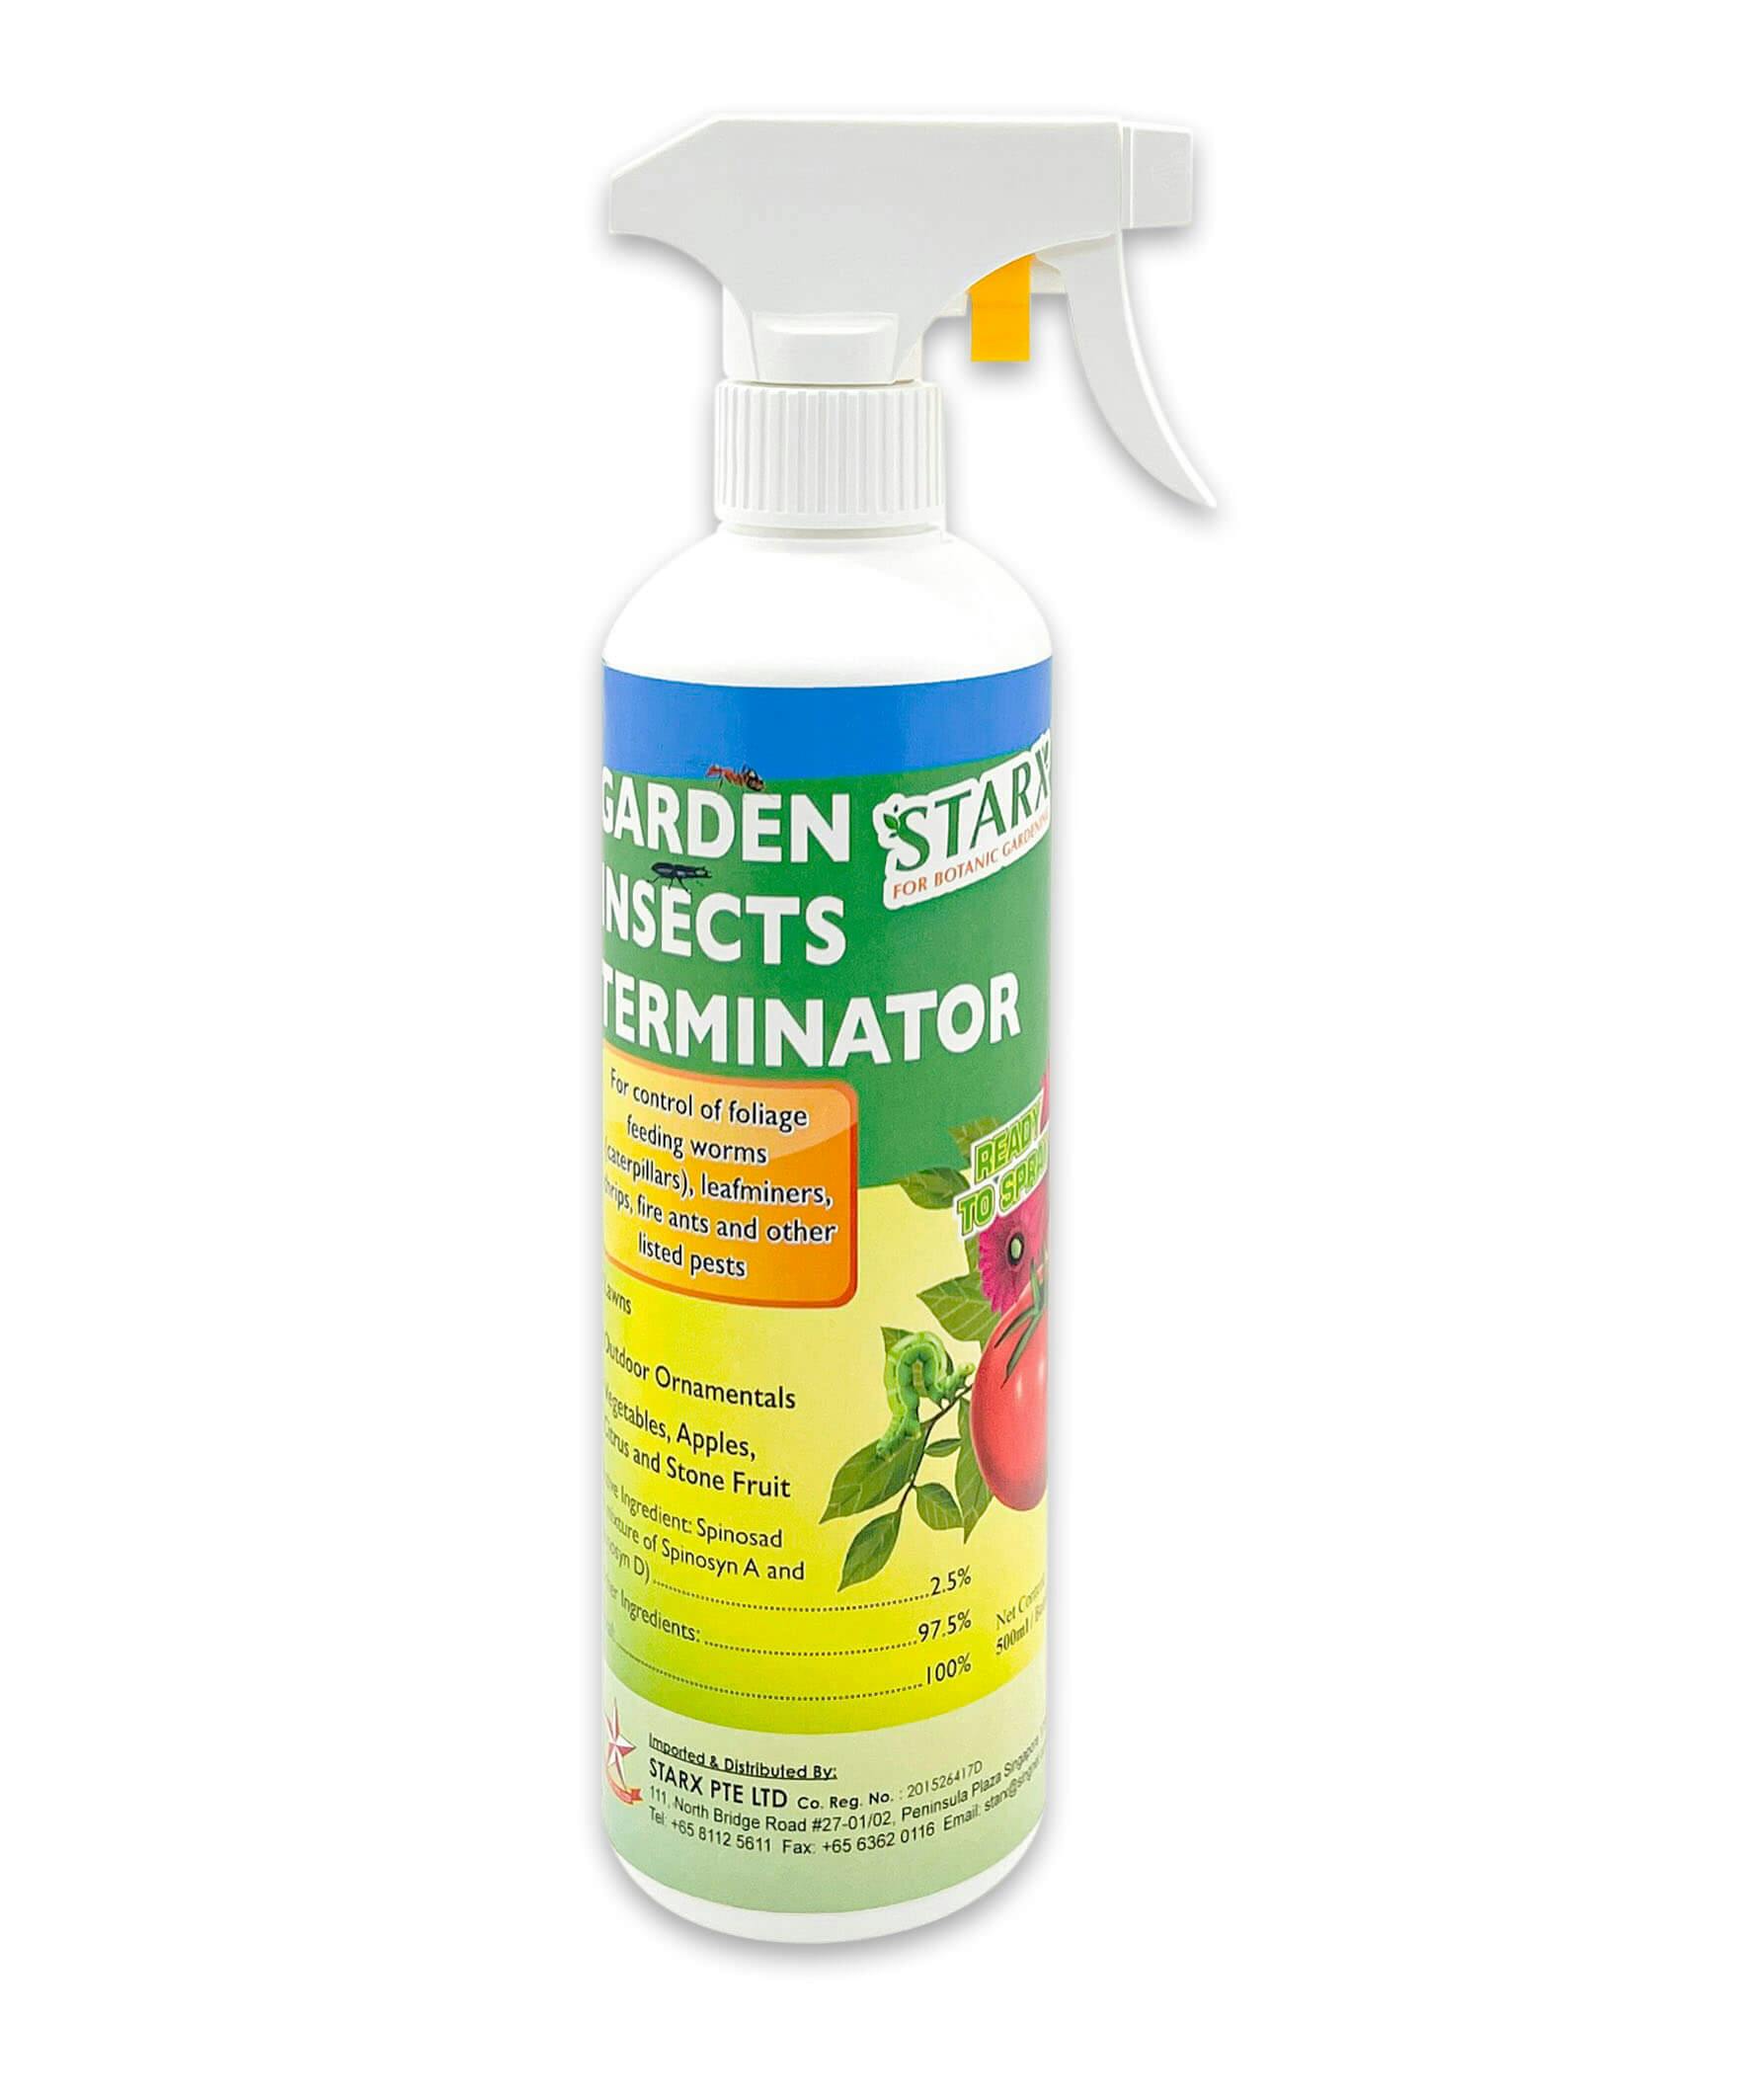 GARDEN INSECTS TERMINATOR RTS